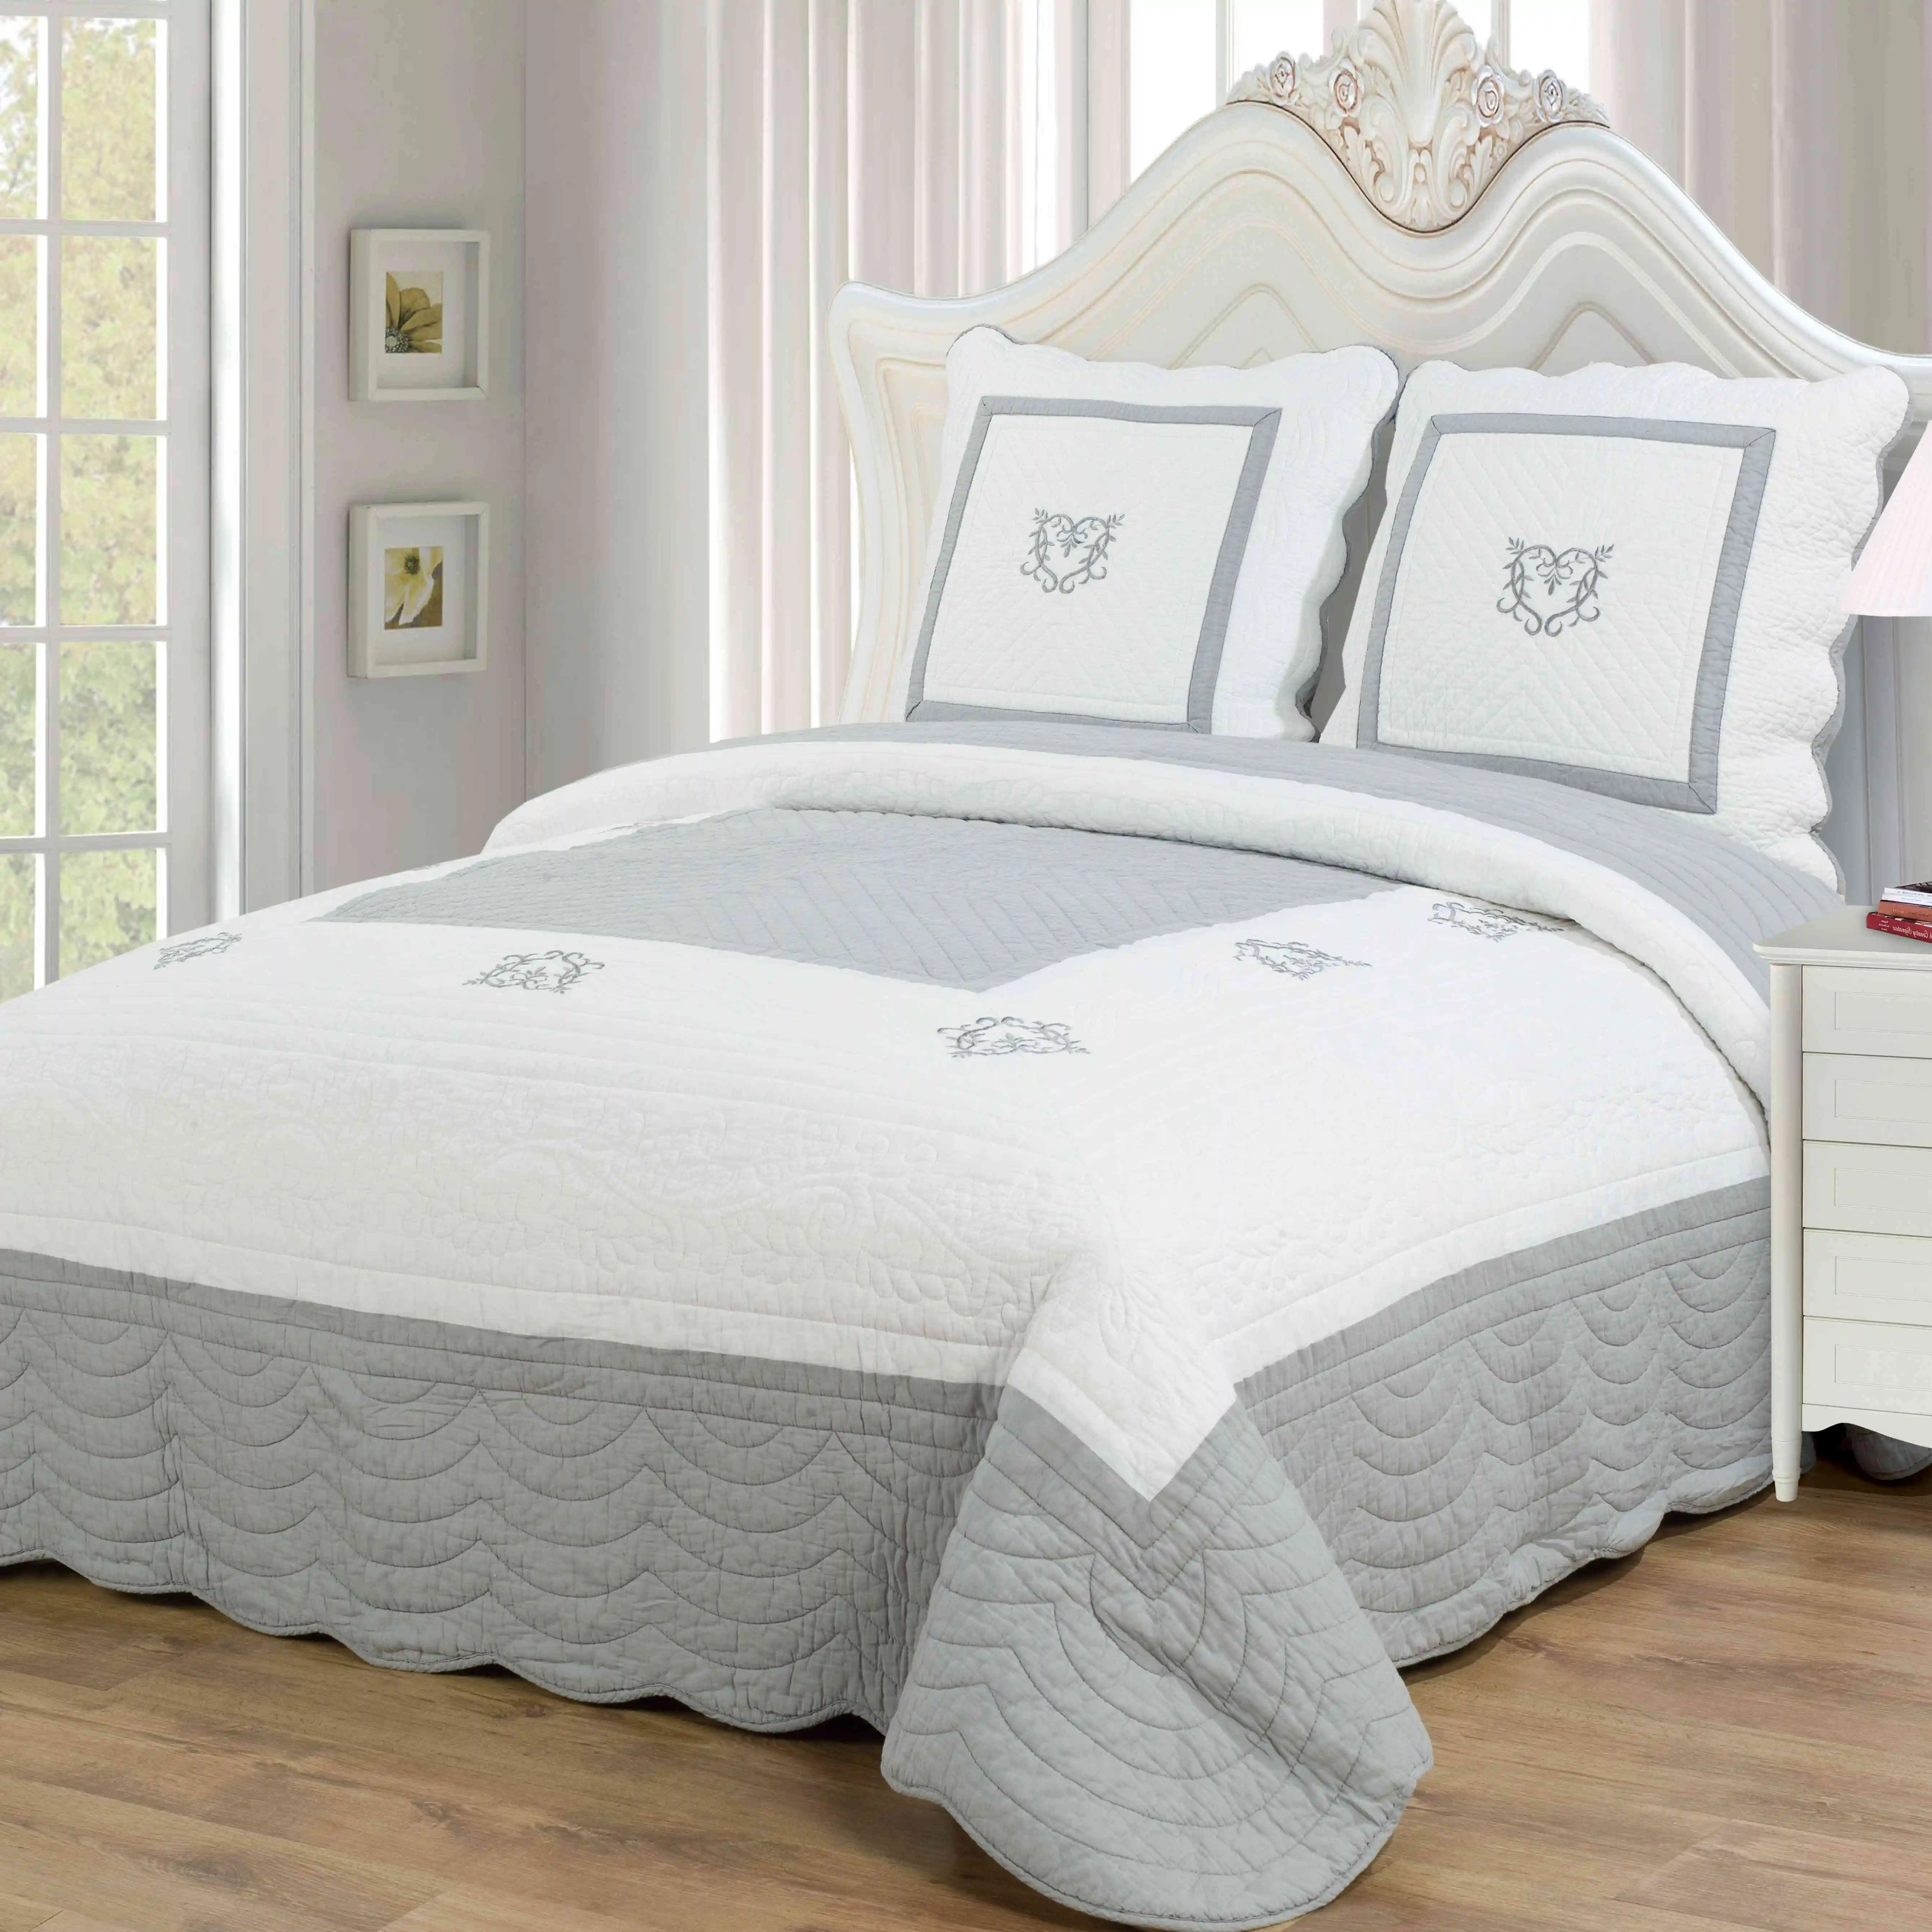 Best Selling Products Cotton Quilt